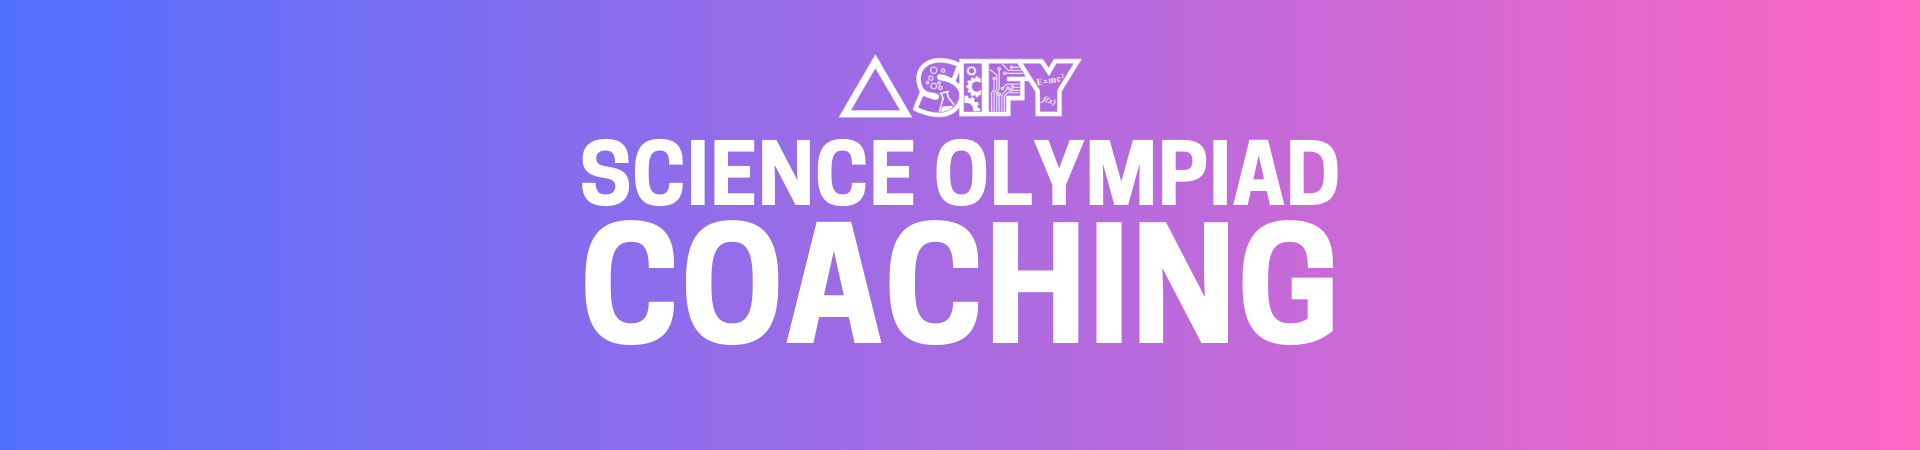 science olympiad coaching